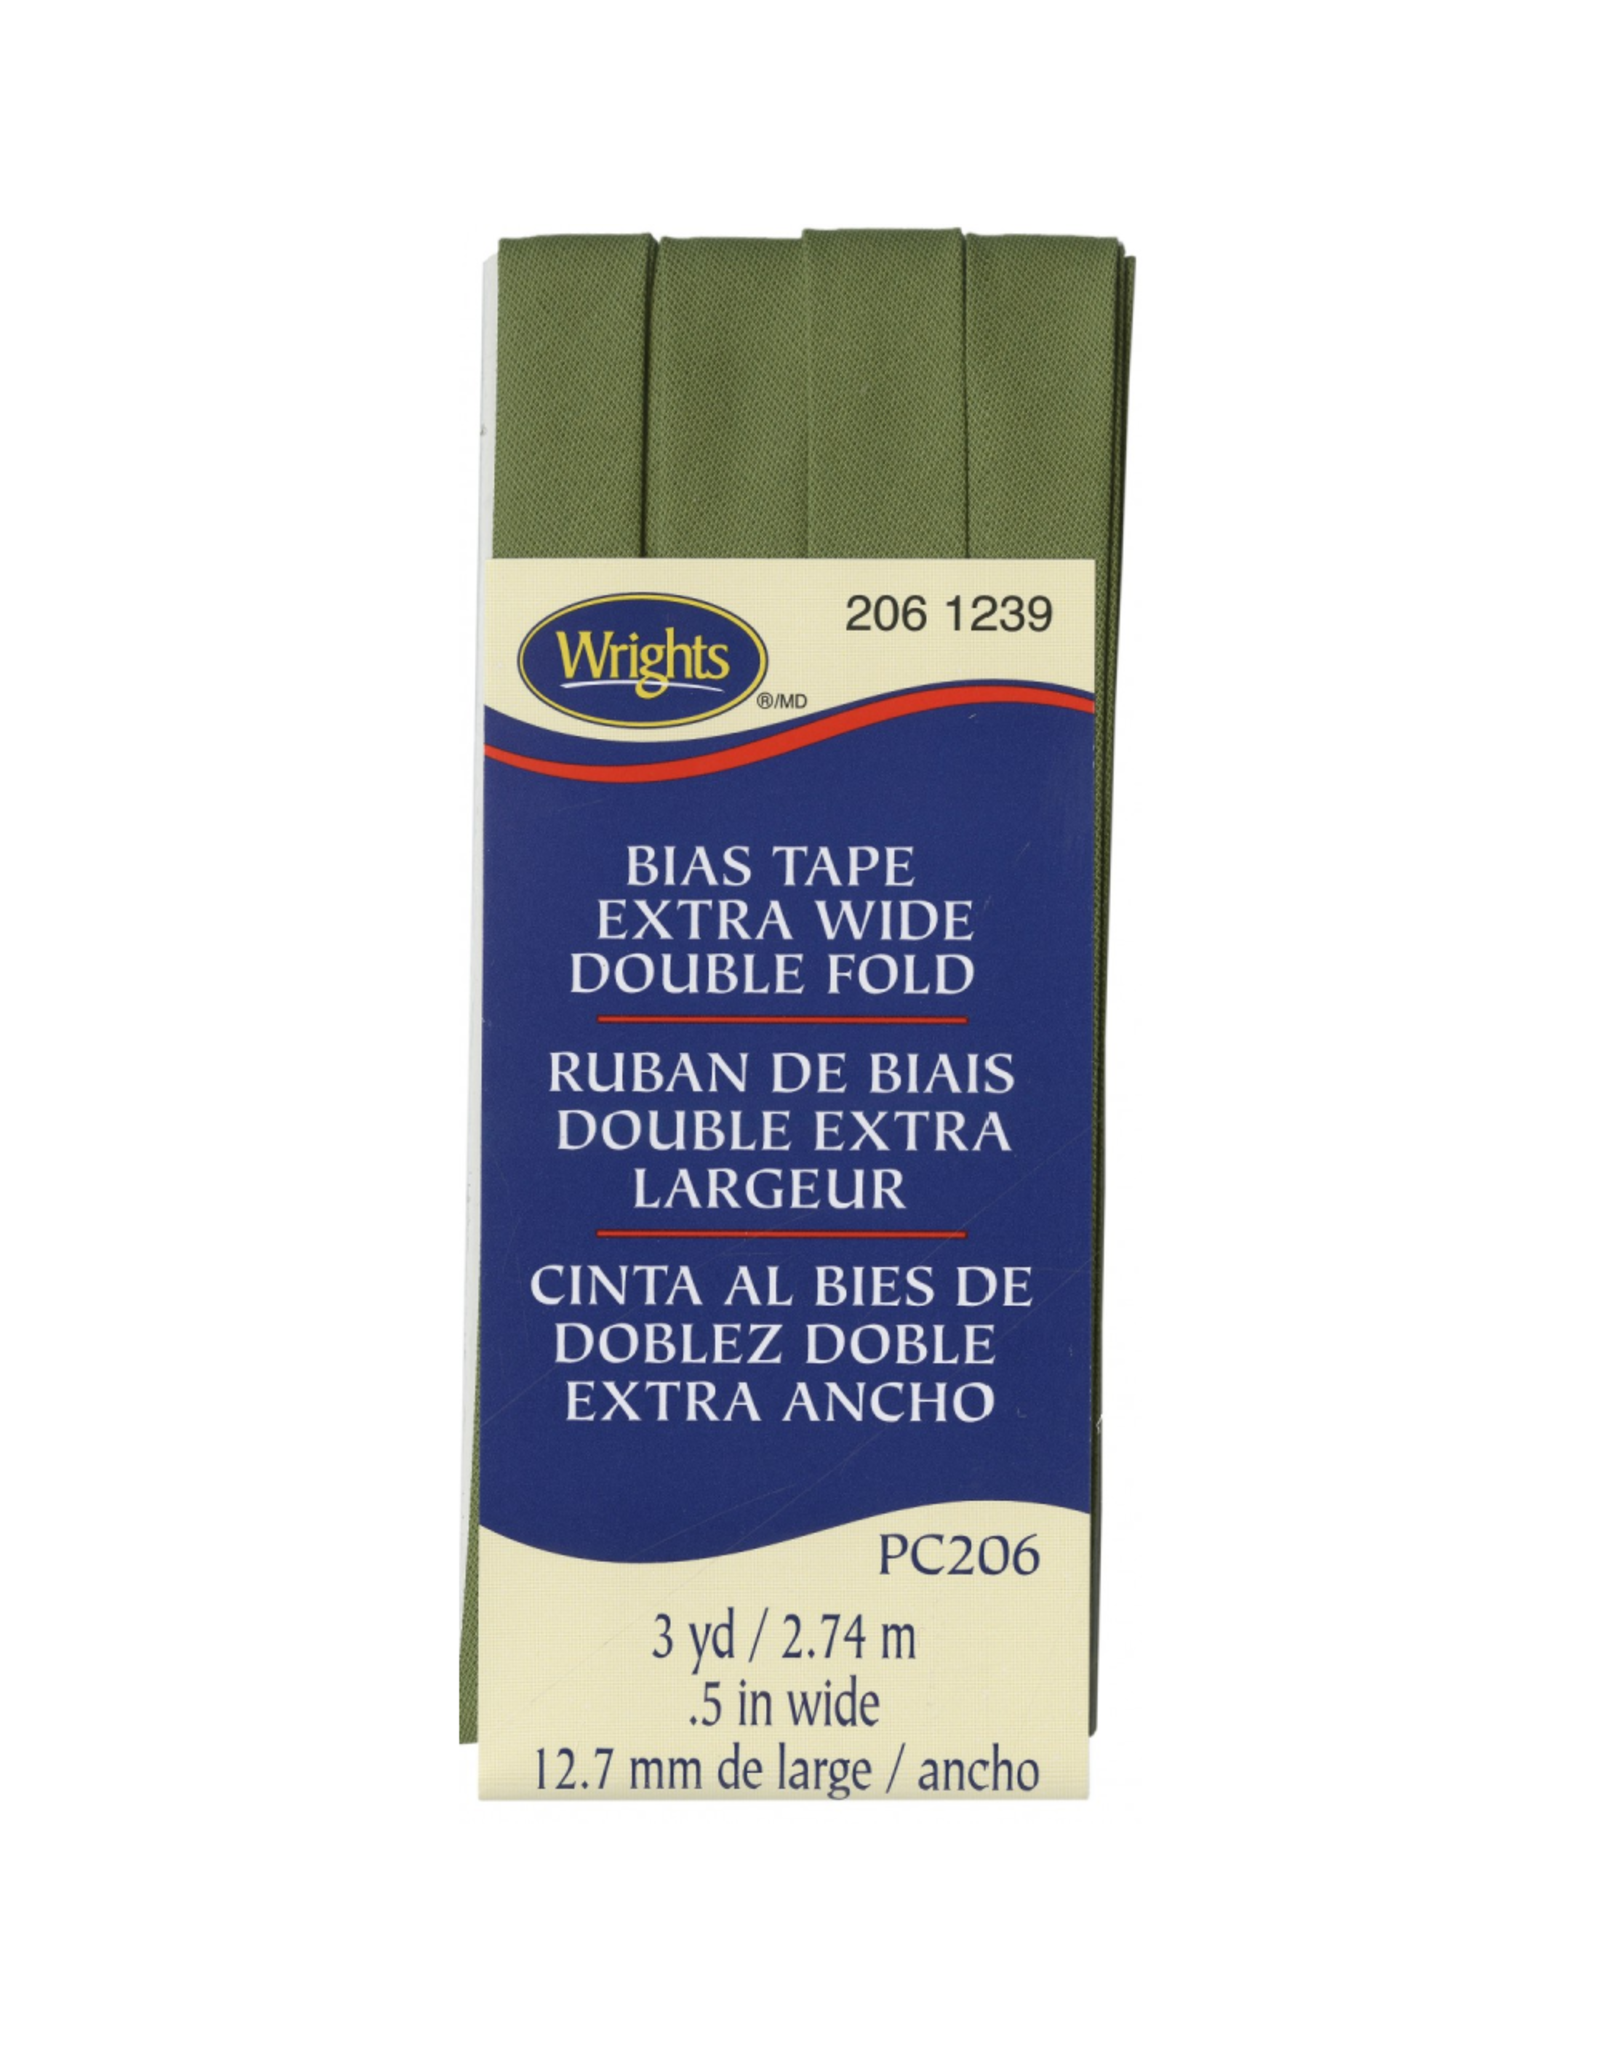 Wrights Wrights Bias Tape, Extra Wide, Double Fold, Leaf 1239